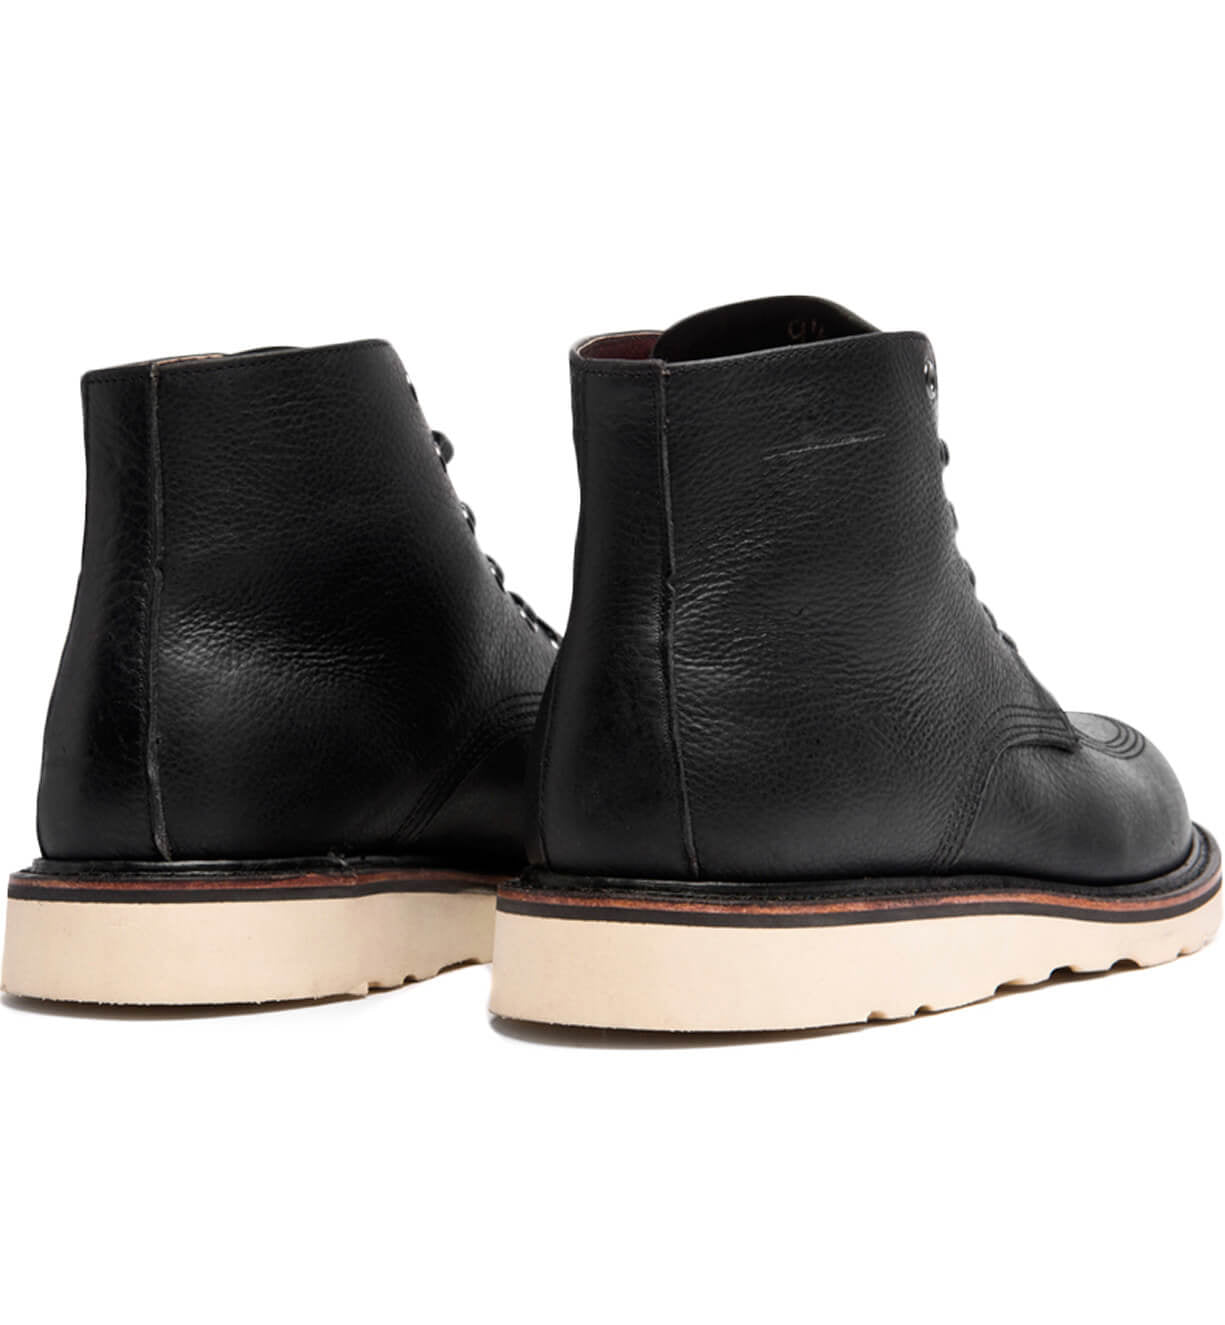 A pair of Broken Homme Jaime Boots, black leather boots with a natural wedge on a white background.